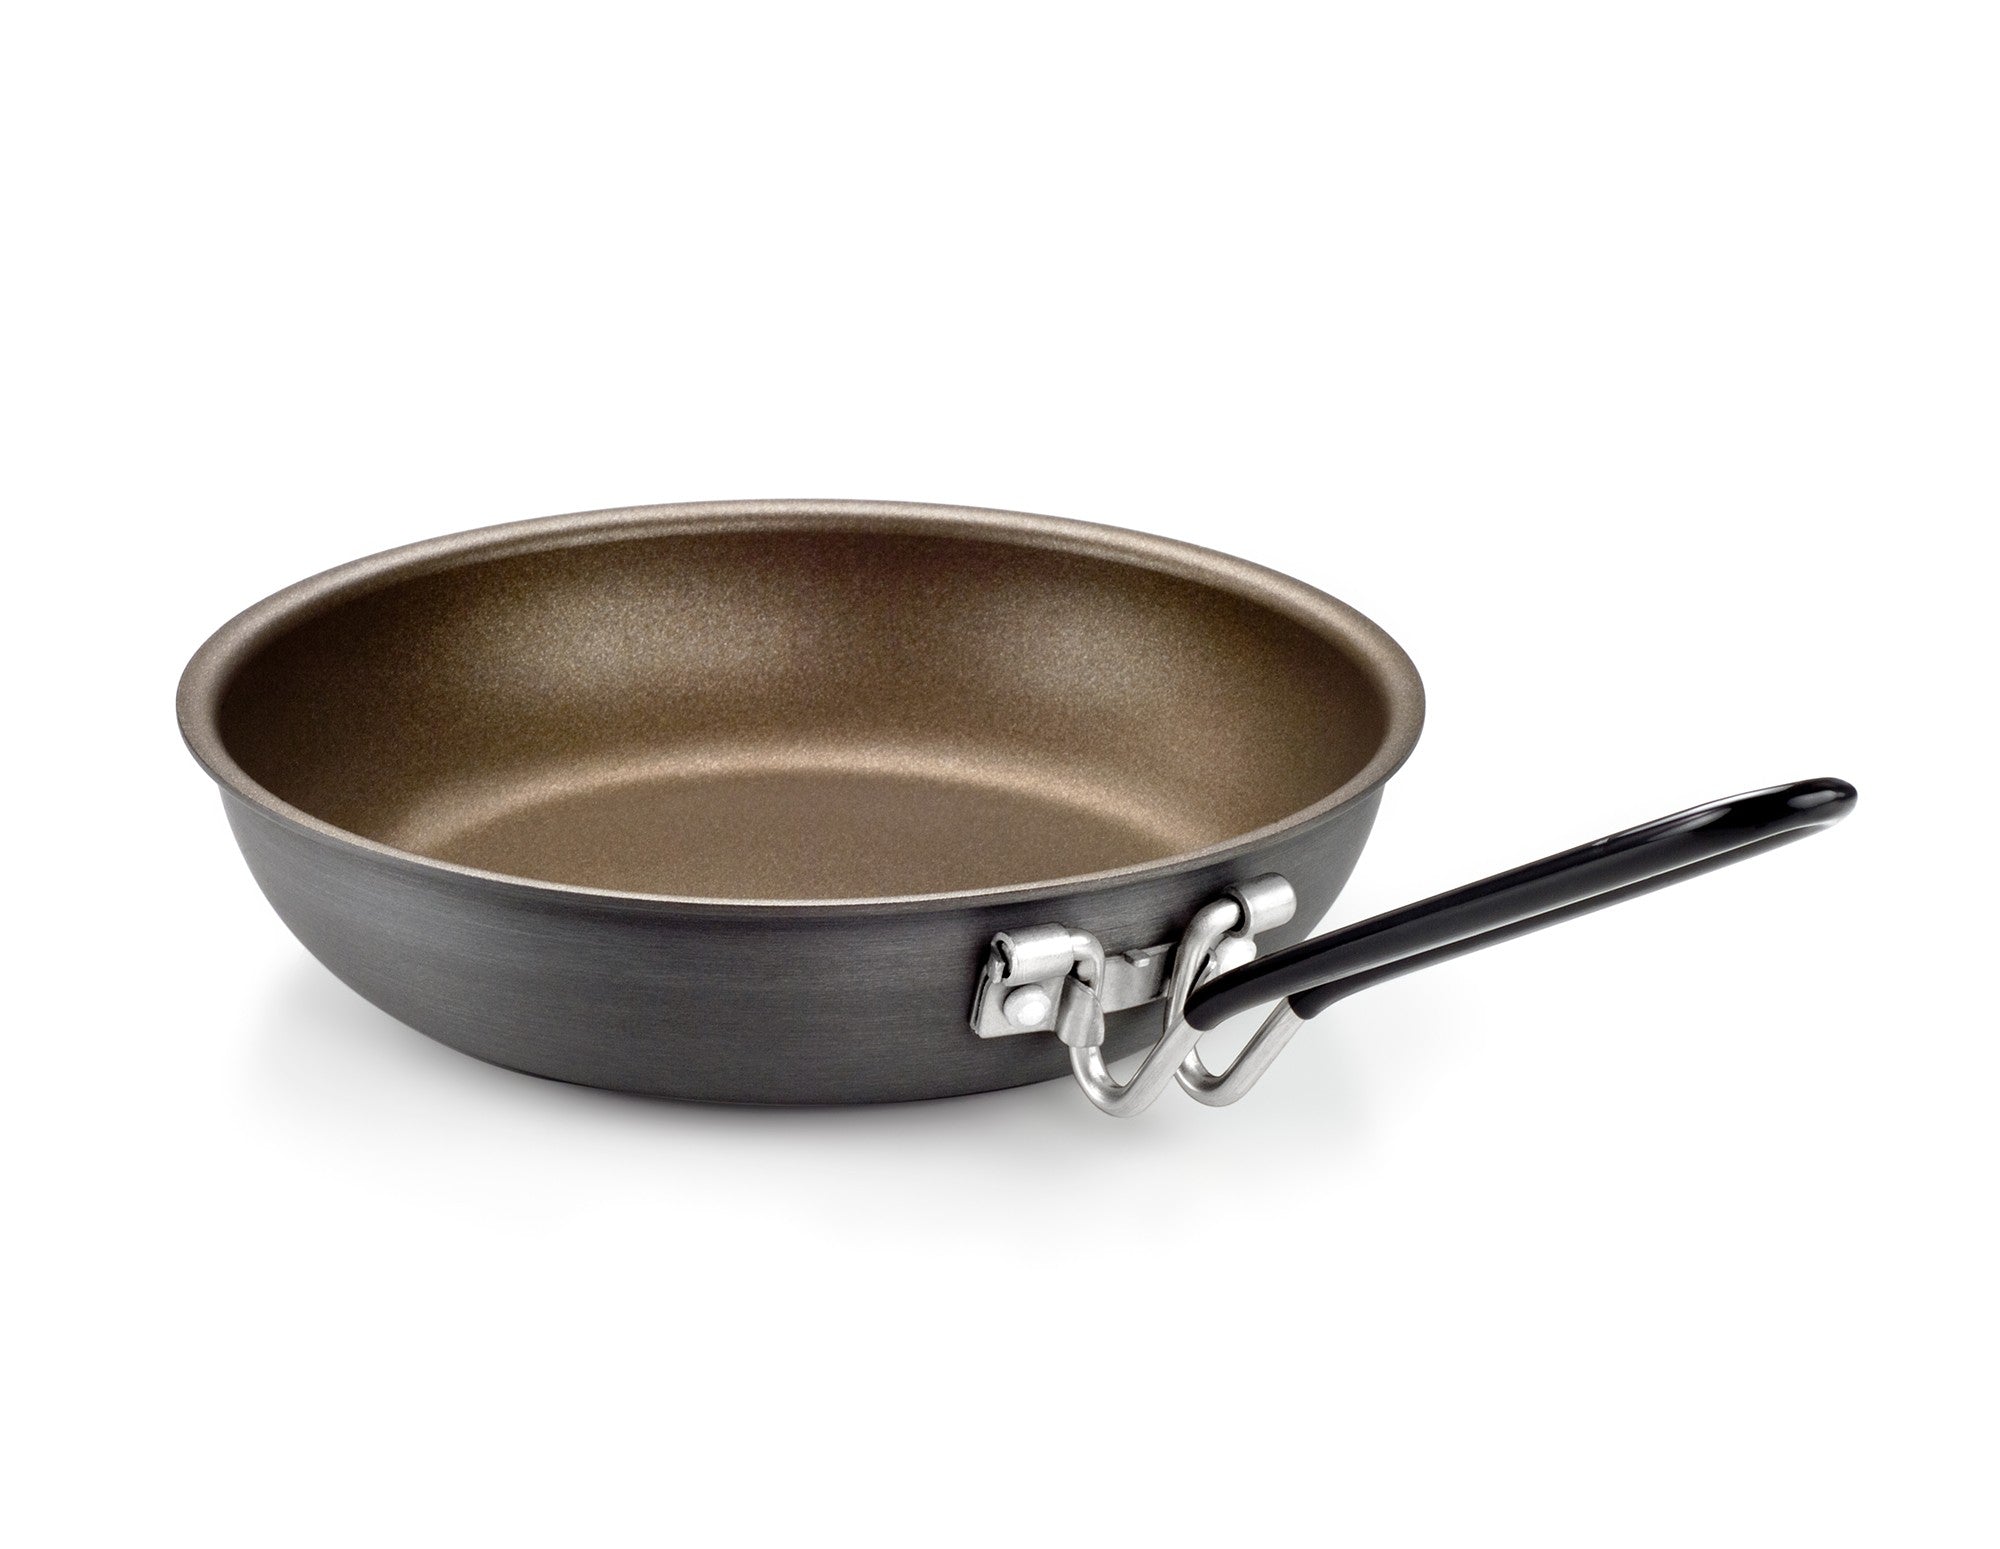 GSI Outdoors Guidecast 12 Frying Pan